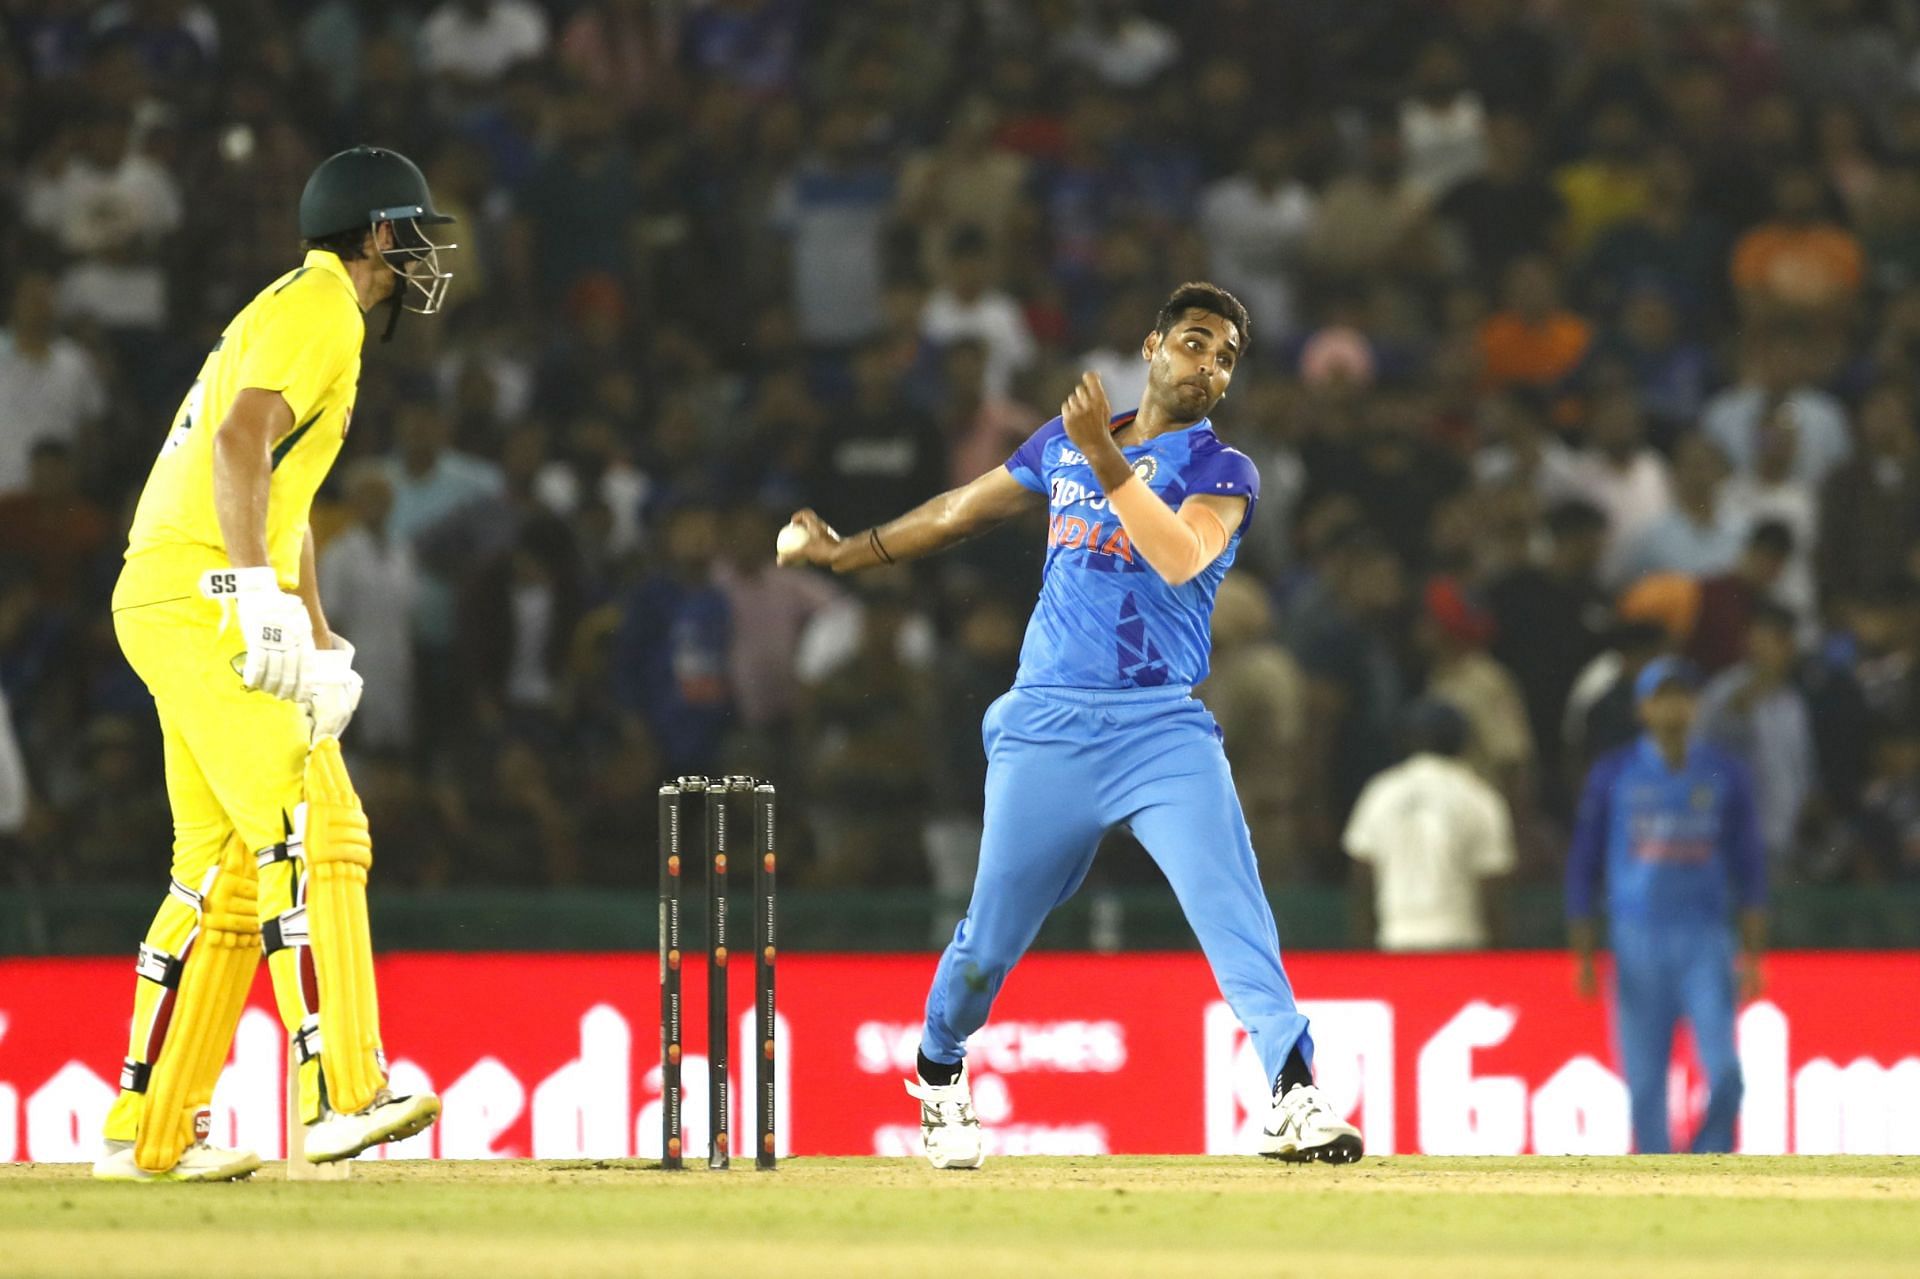 Bhuvneshwar Kumar has been expensive at the death. Pic: Getty Images